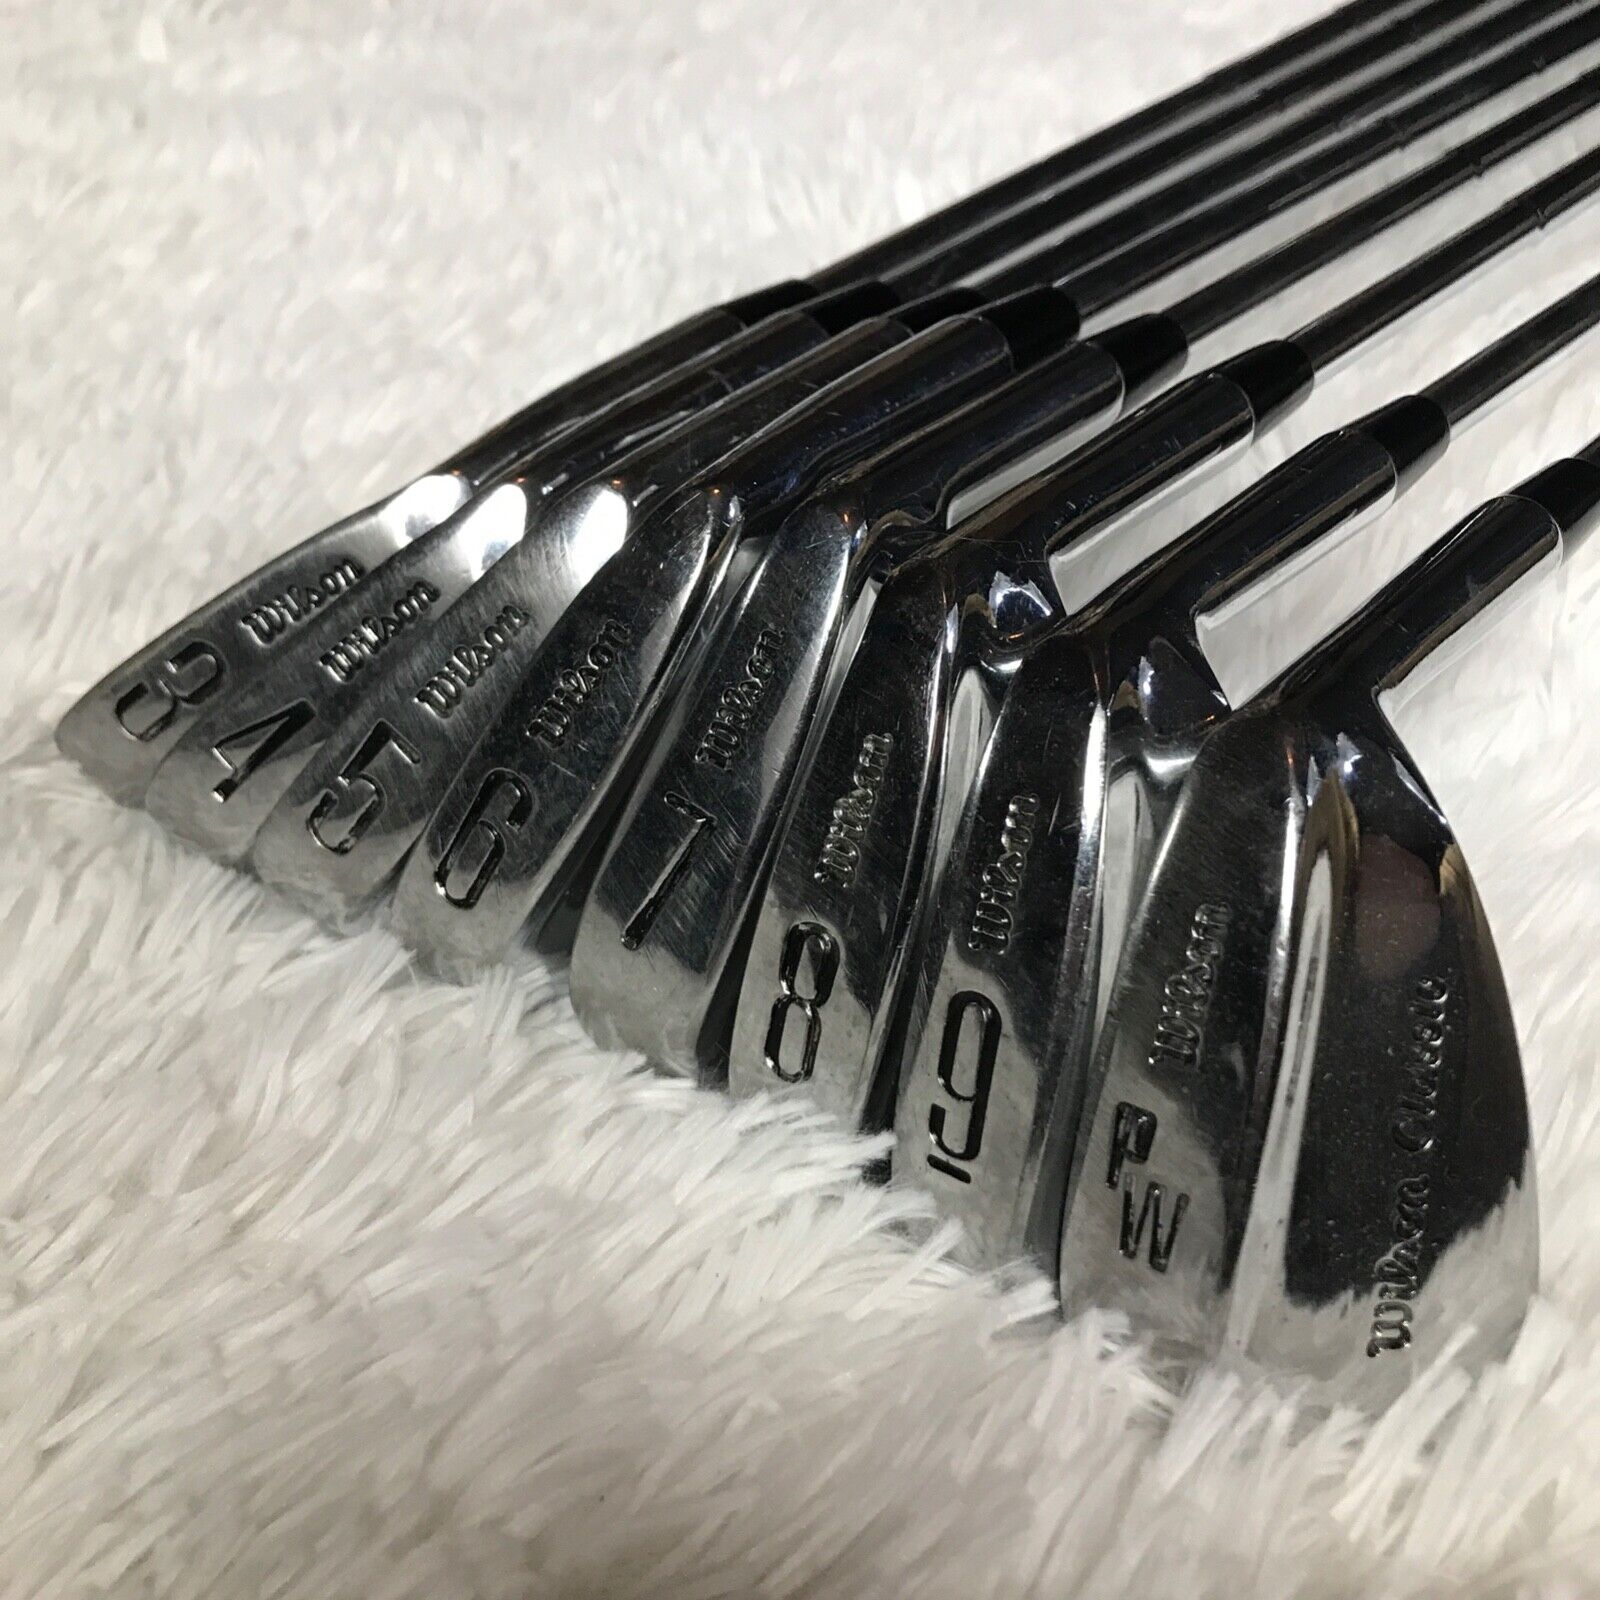 Wilson Classic Iron Set 3-PW (8 Clubs) ⛳ RH Stainless Steel Shafts